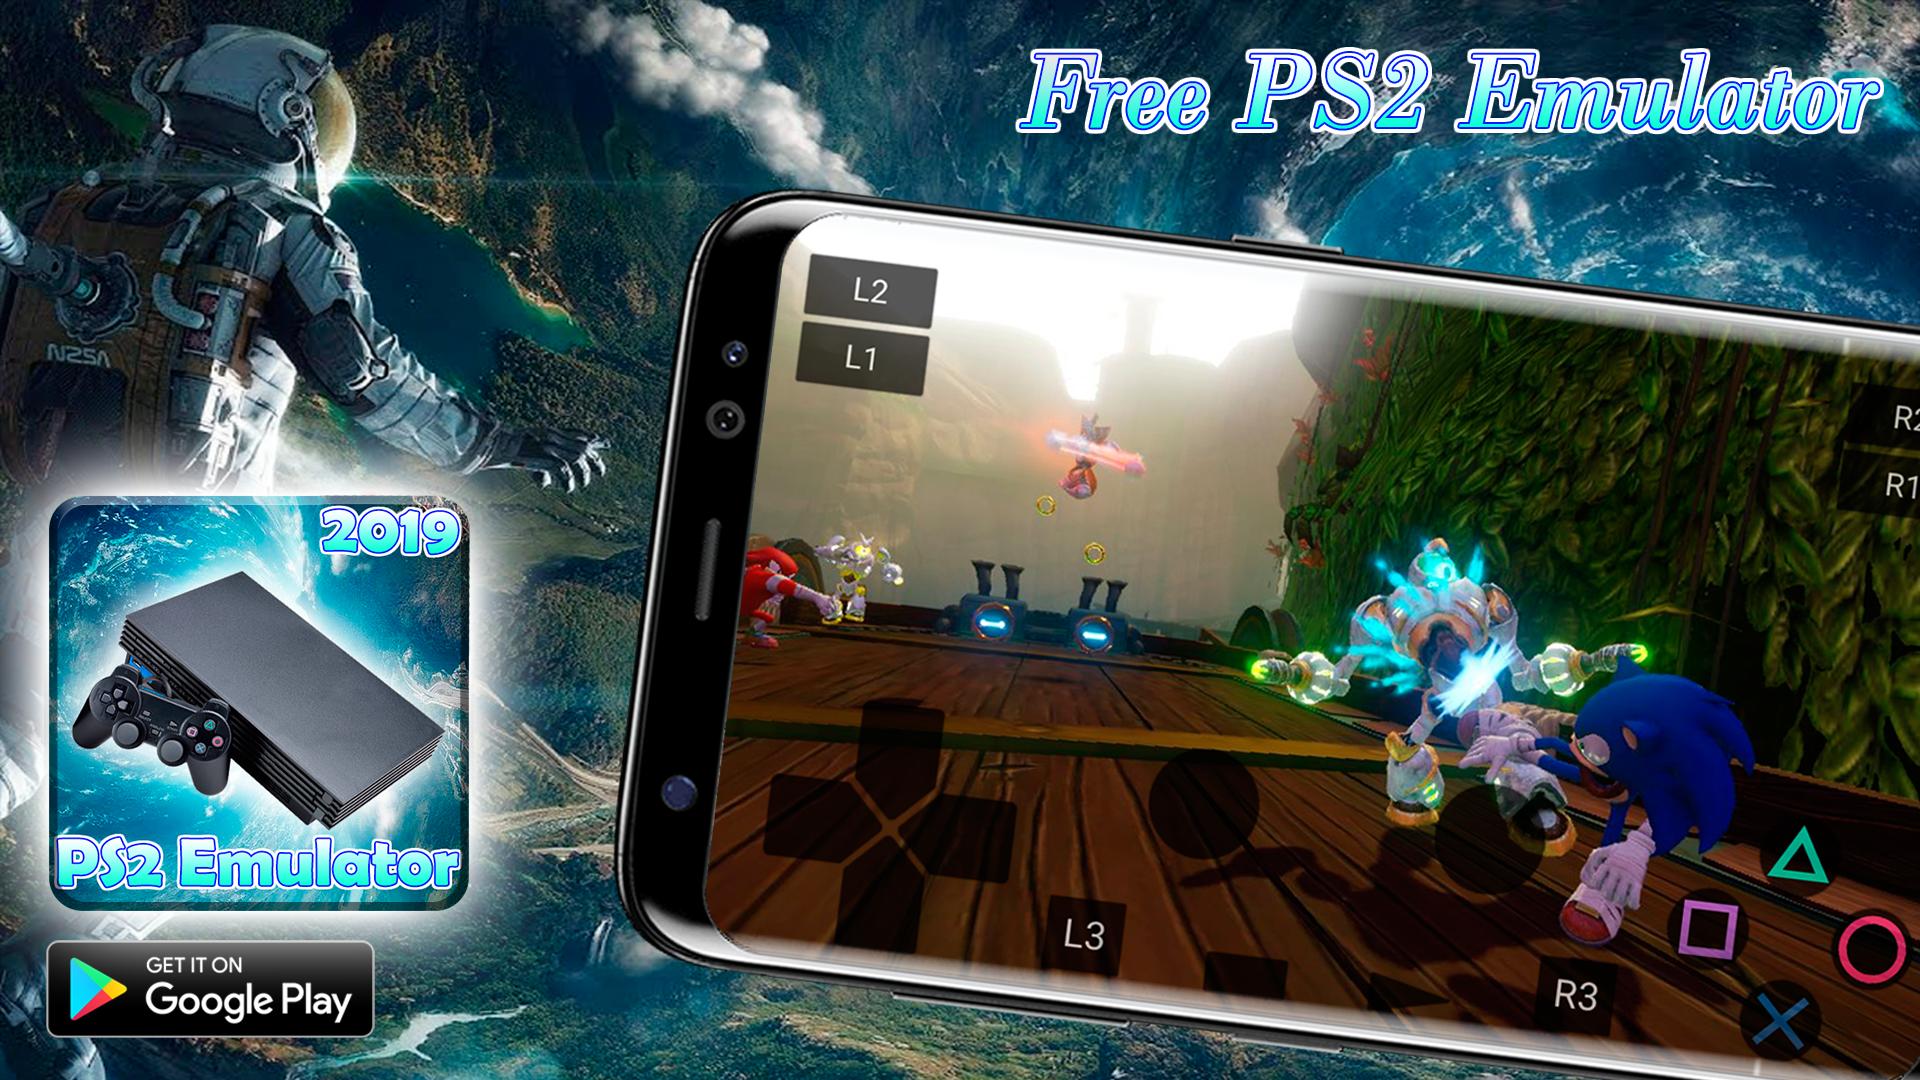 Free Pro Ps2 Emulator Games For Android 2019 For Android - r1 download roblox link download free